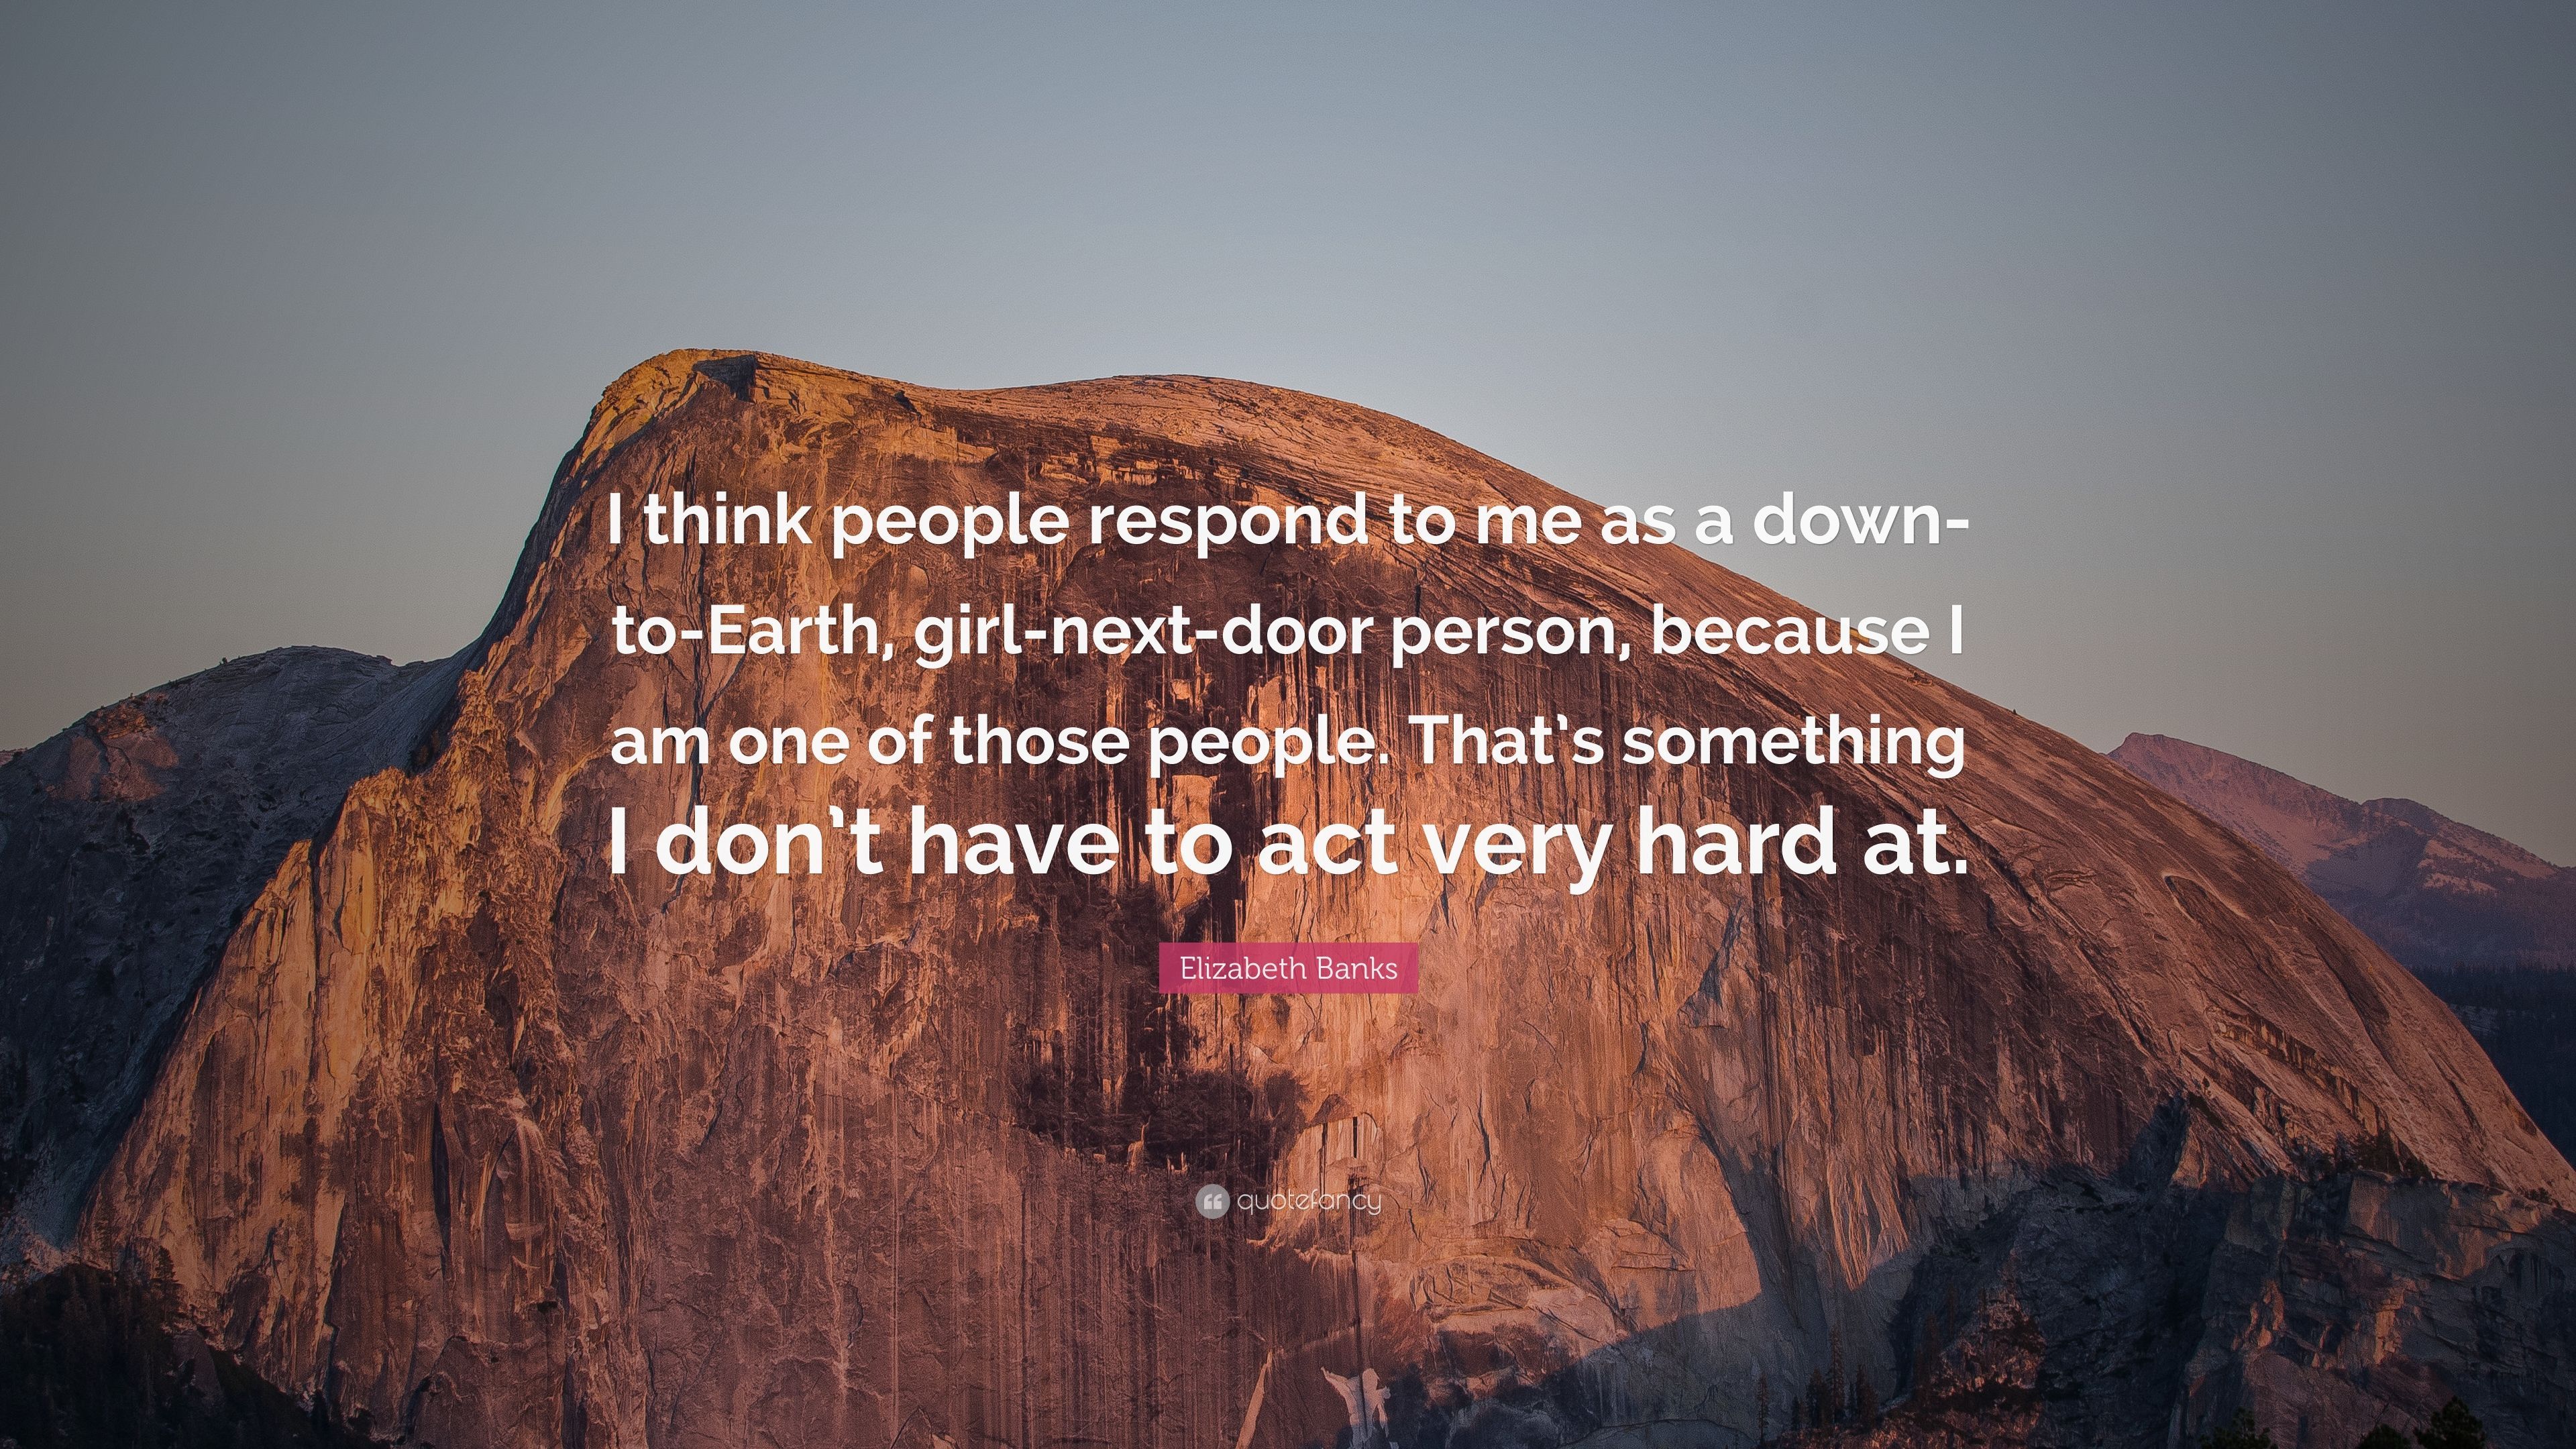 Elizabeth Banks Quote: “I Think People Respond To Me As A Down To